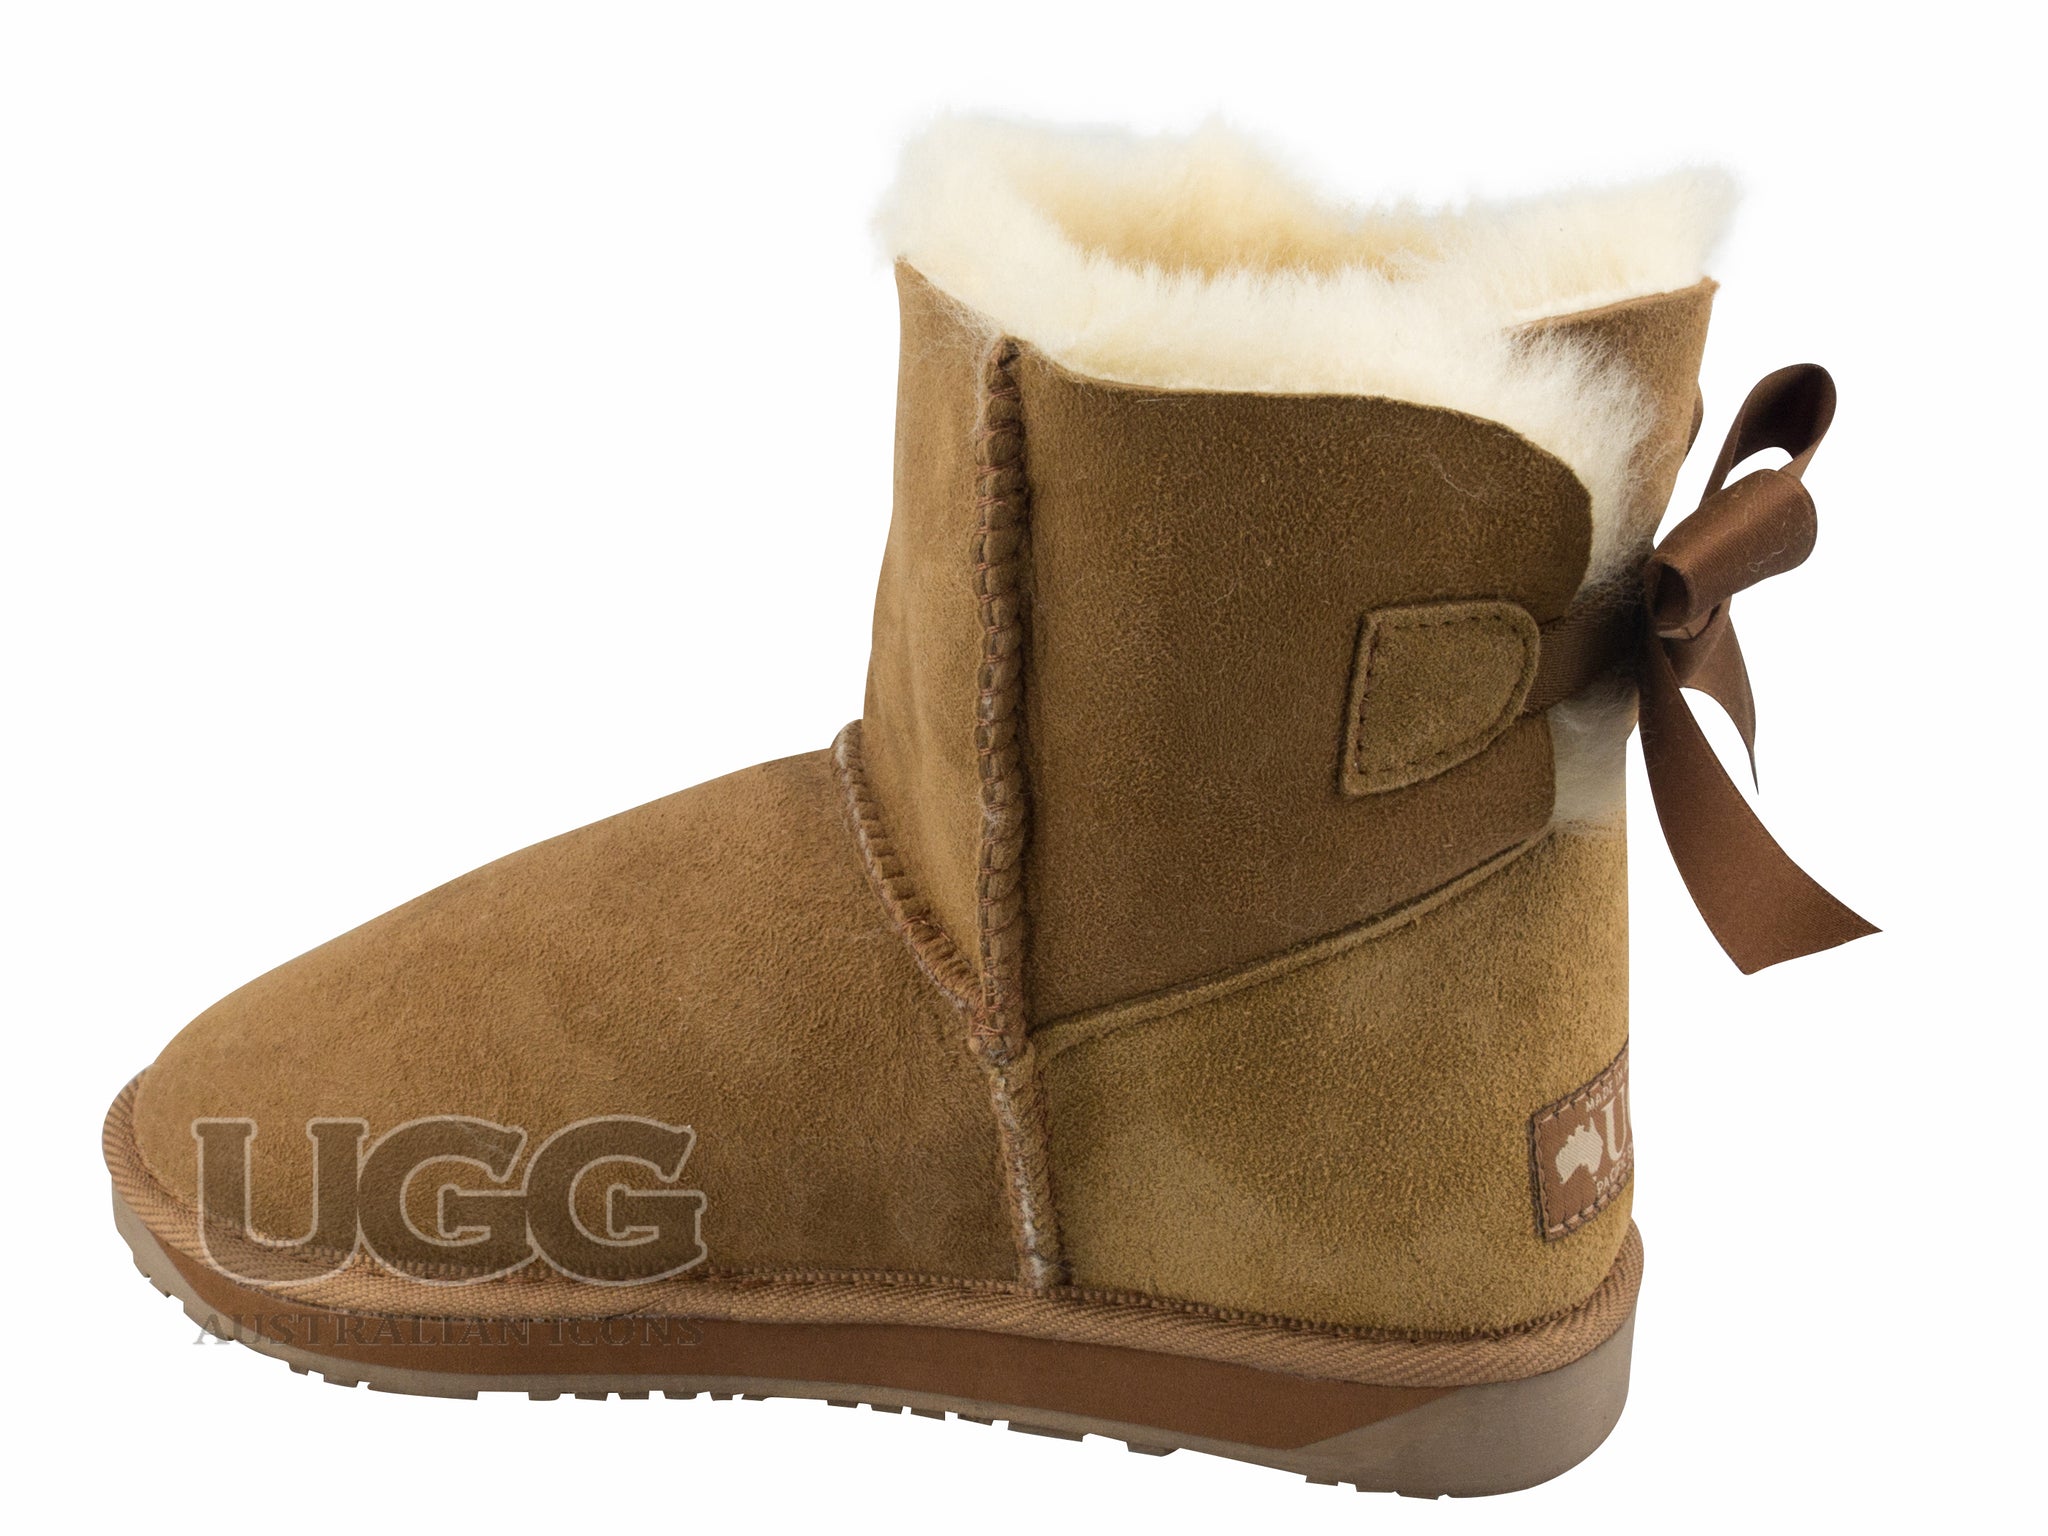 ugg boots bows on back